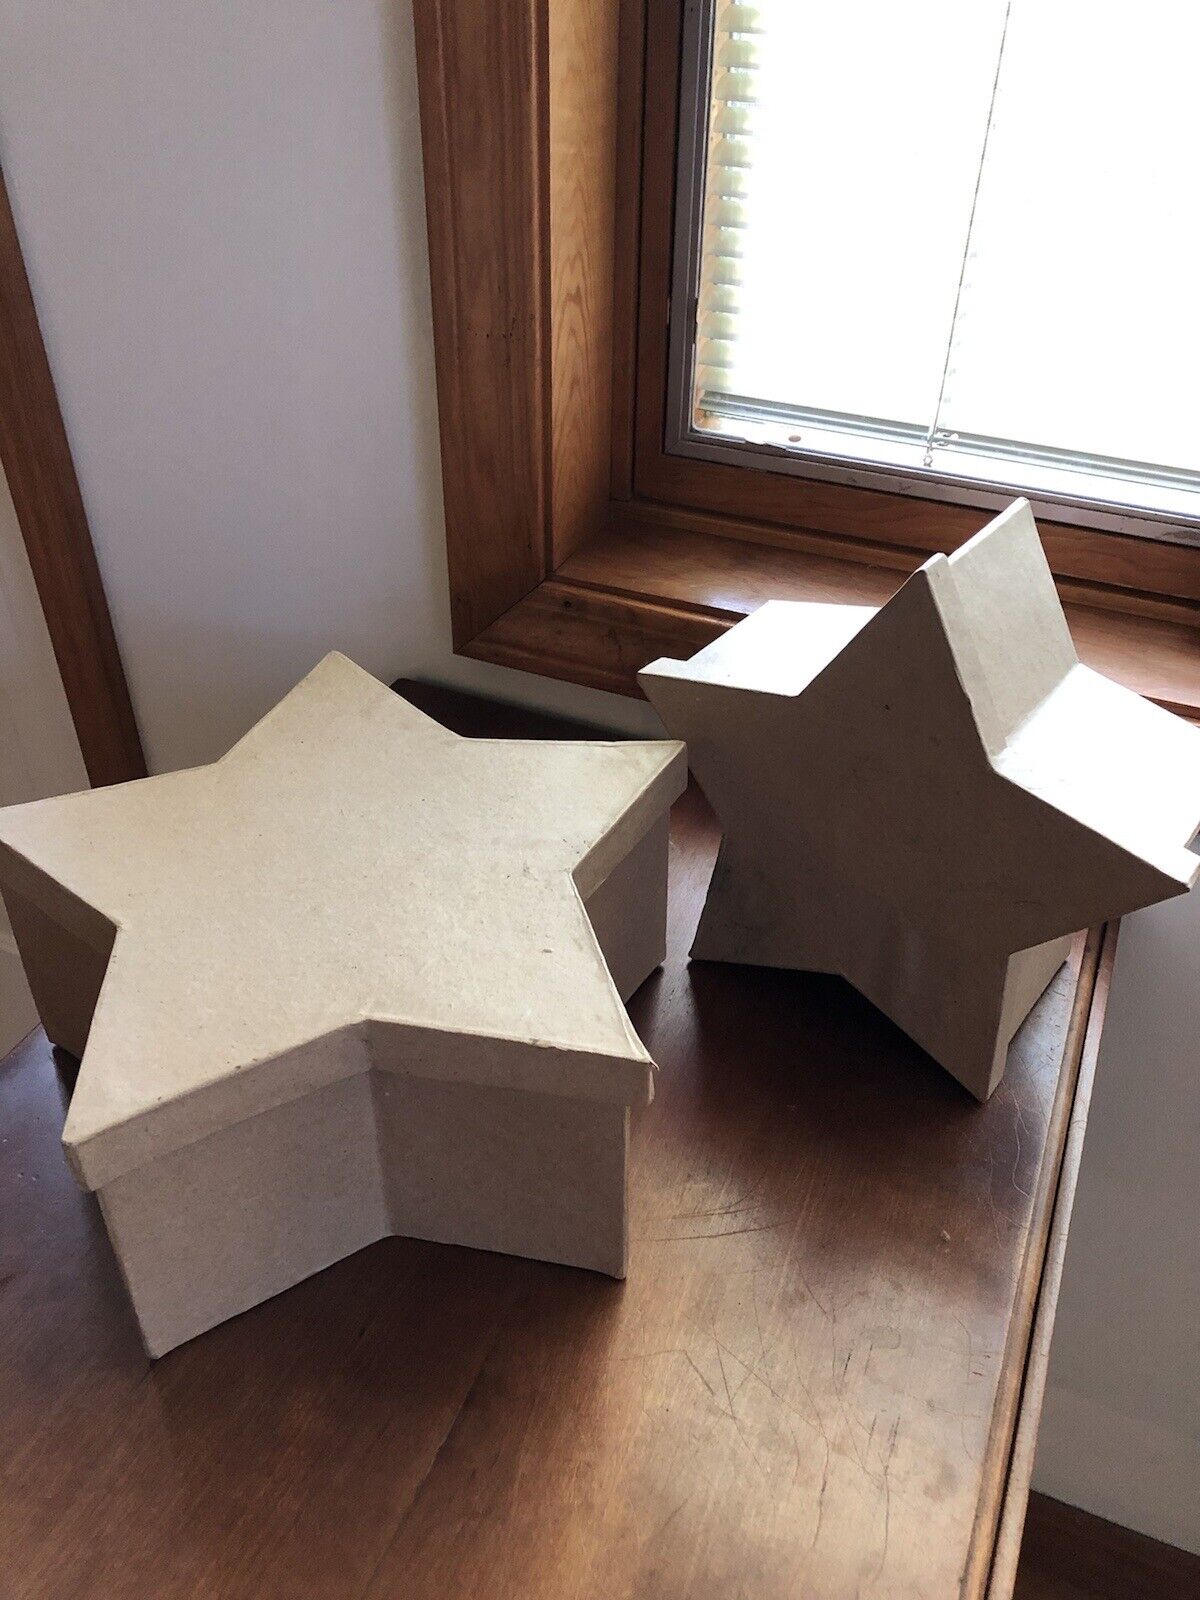 Unfinished Paper Mache Star Nesting Boxes | 2 Boxes